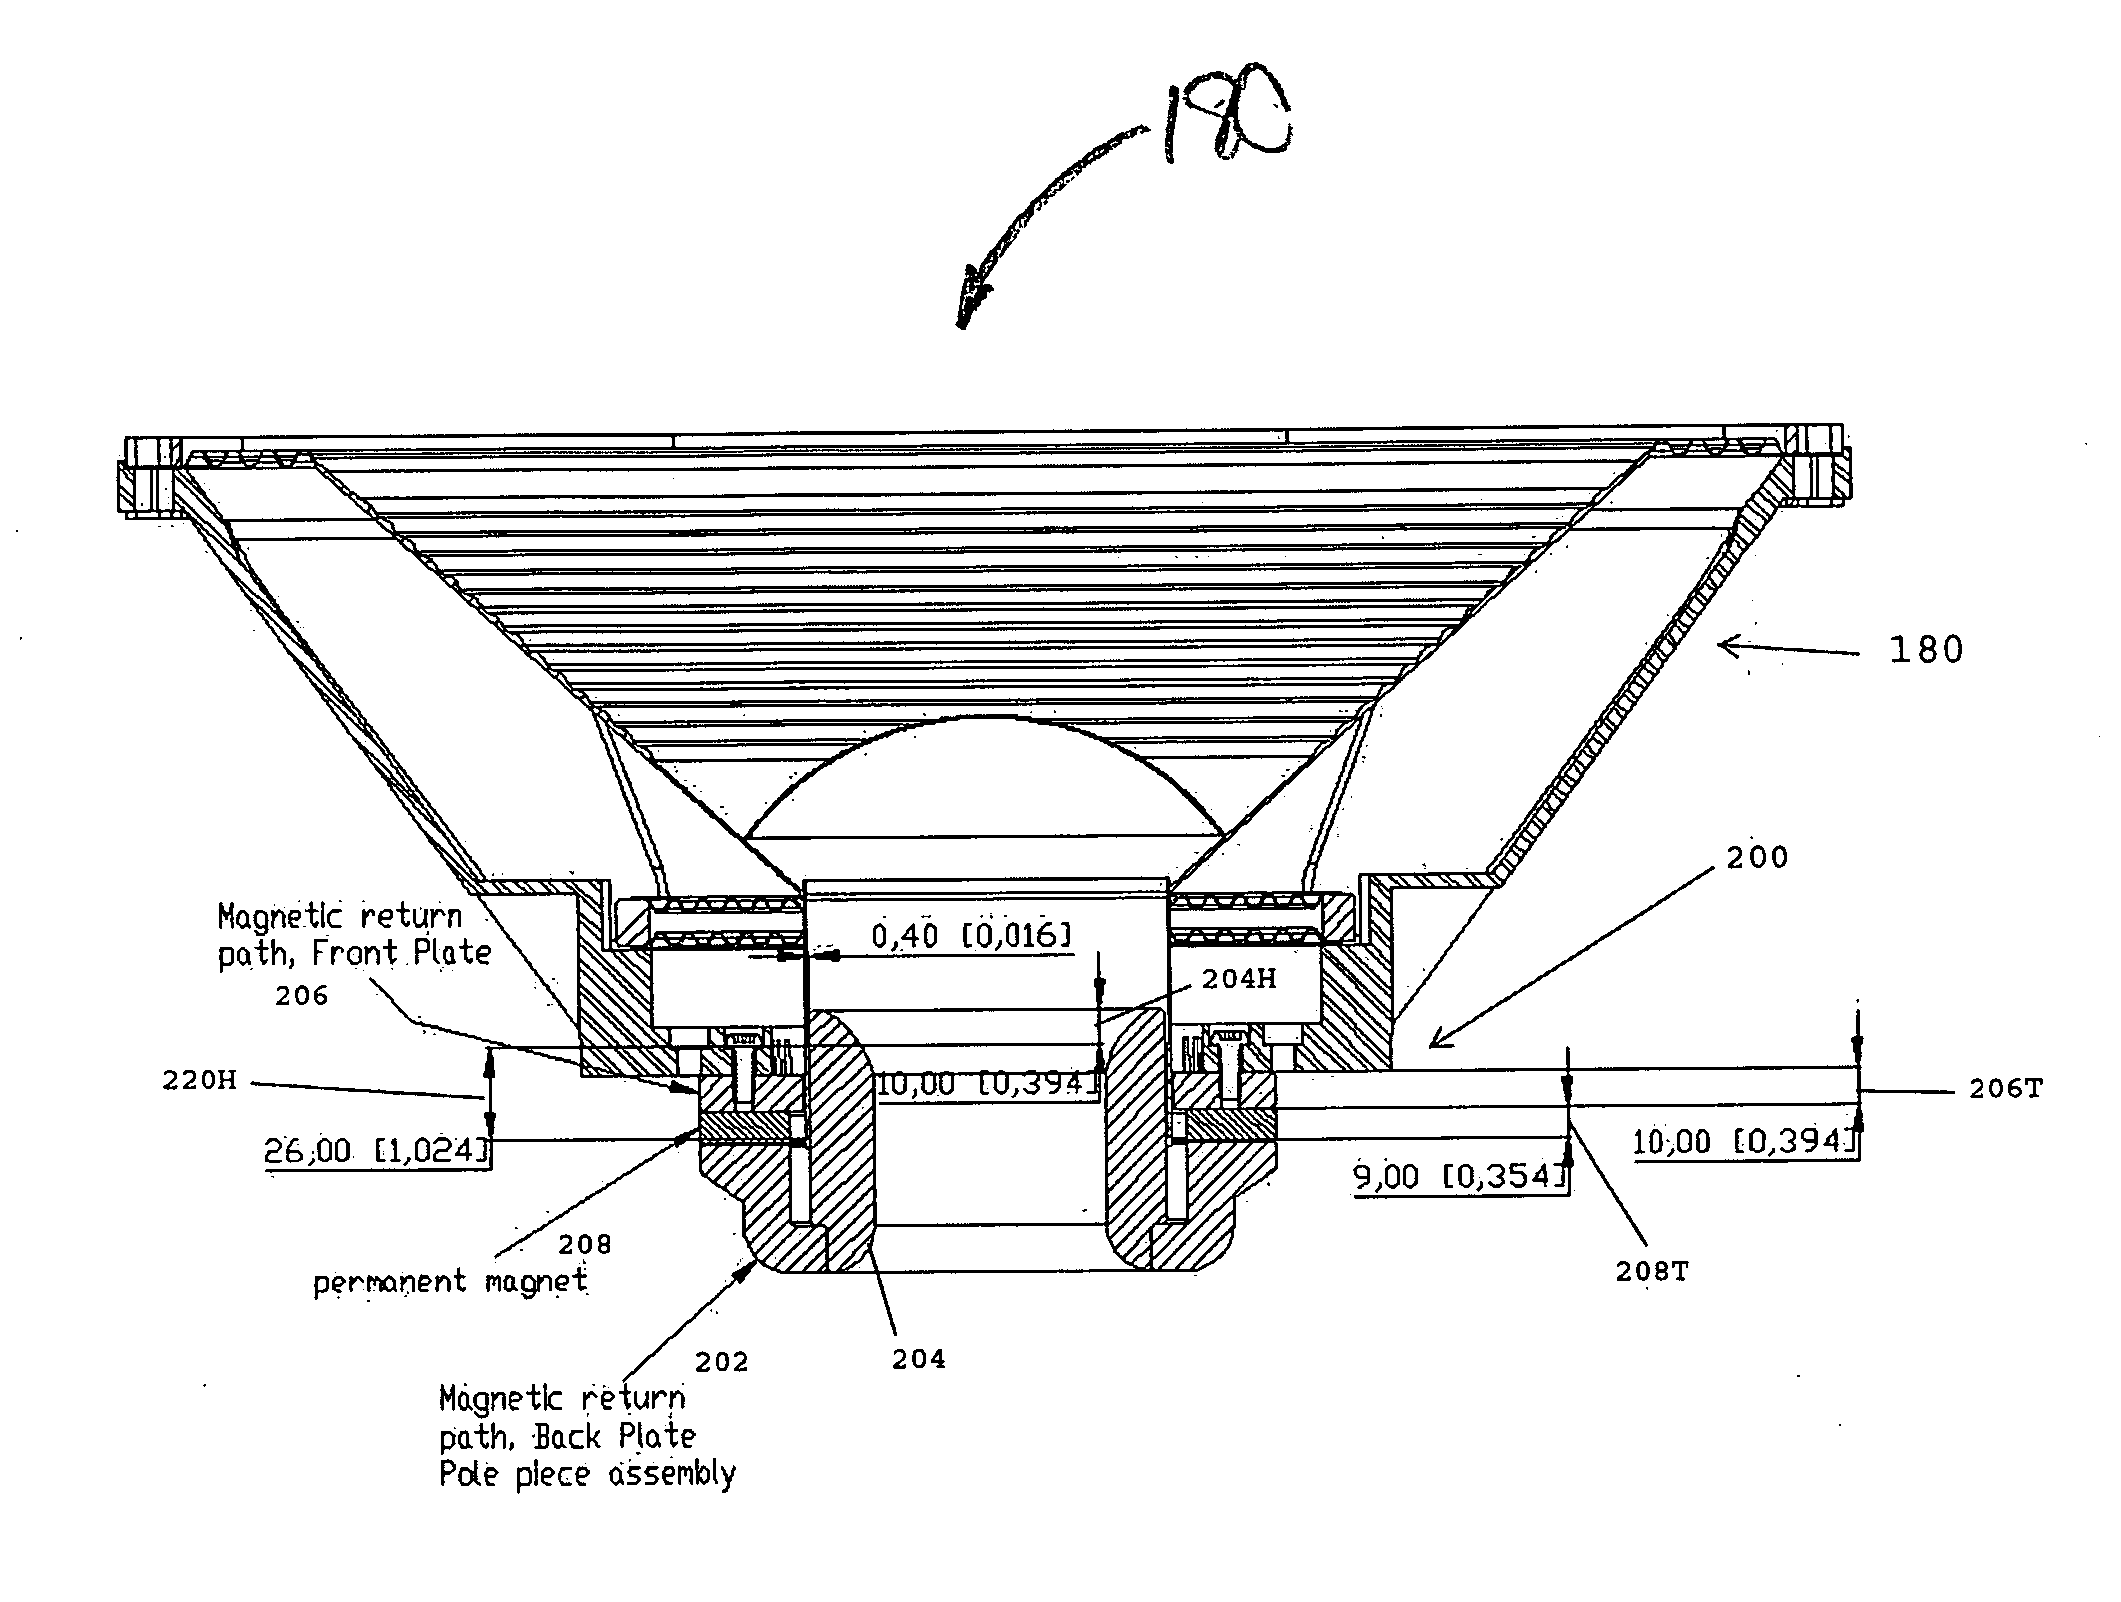 Transducer motor structure and inside-only voice coil for use in loudspeakers